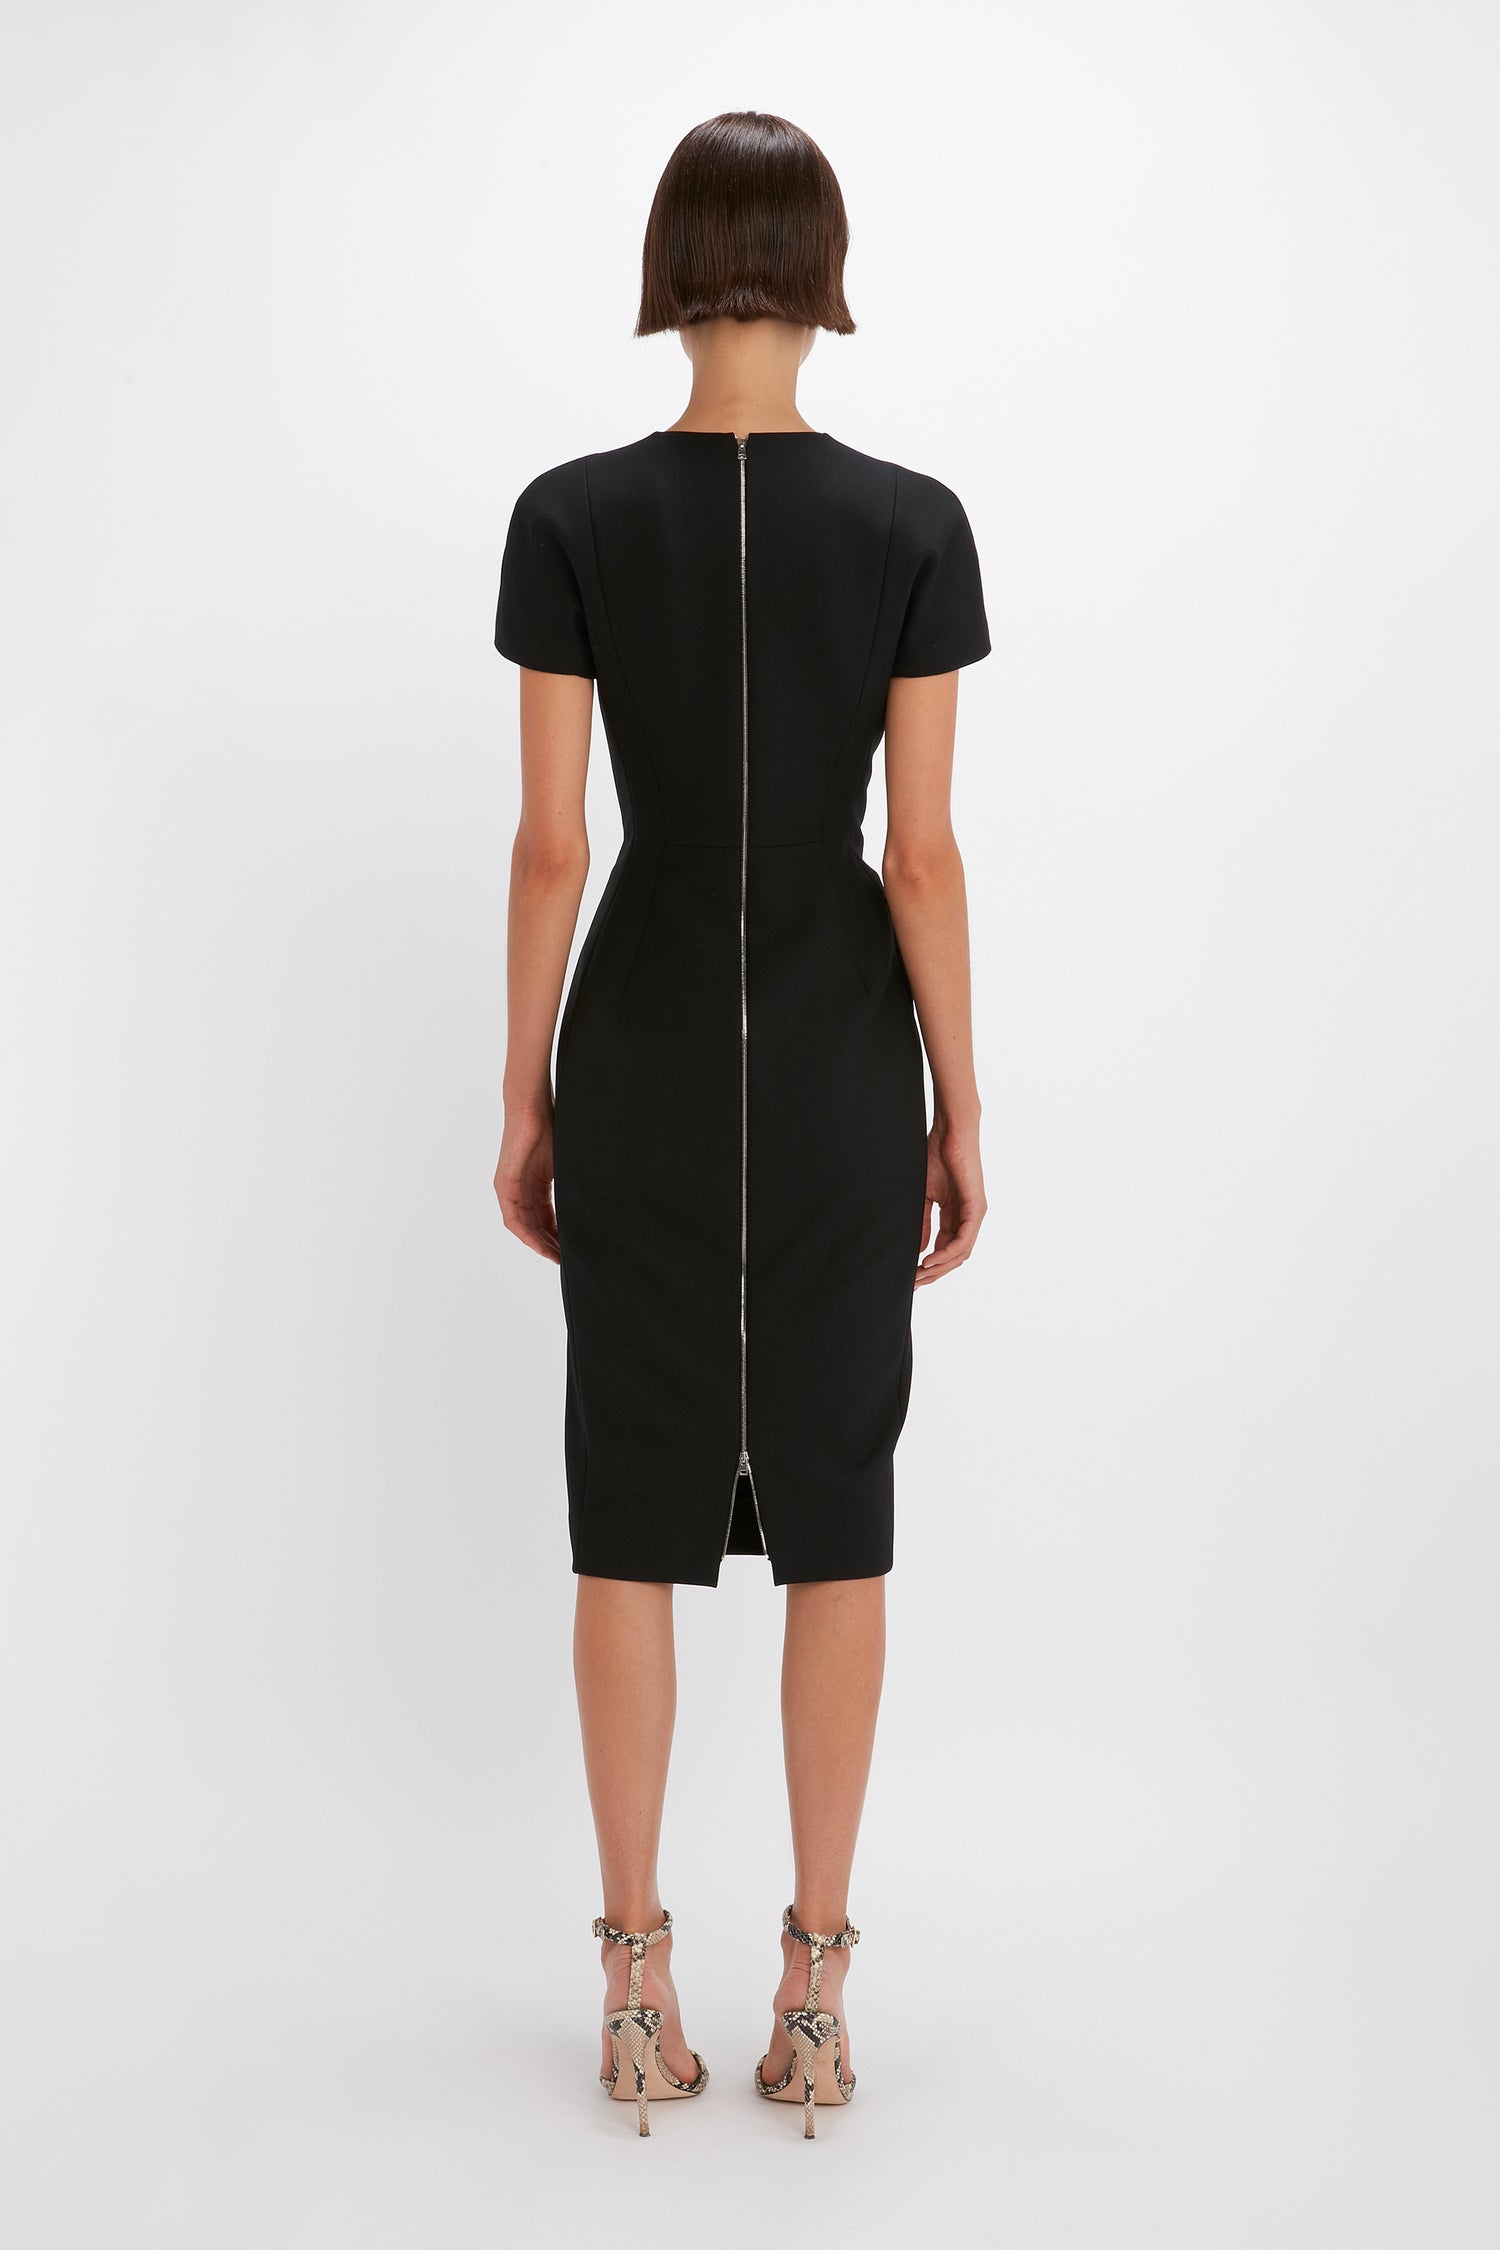 A person with short hair is standing with their back facing the camera, wearing a knee-length, short-sleeved black Spiral Fitted T-Shirt Dress In Black by Victoria Beckham with a visible back zipper. The elegant silhouette is complemented by high-heeled sandals.